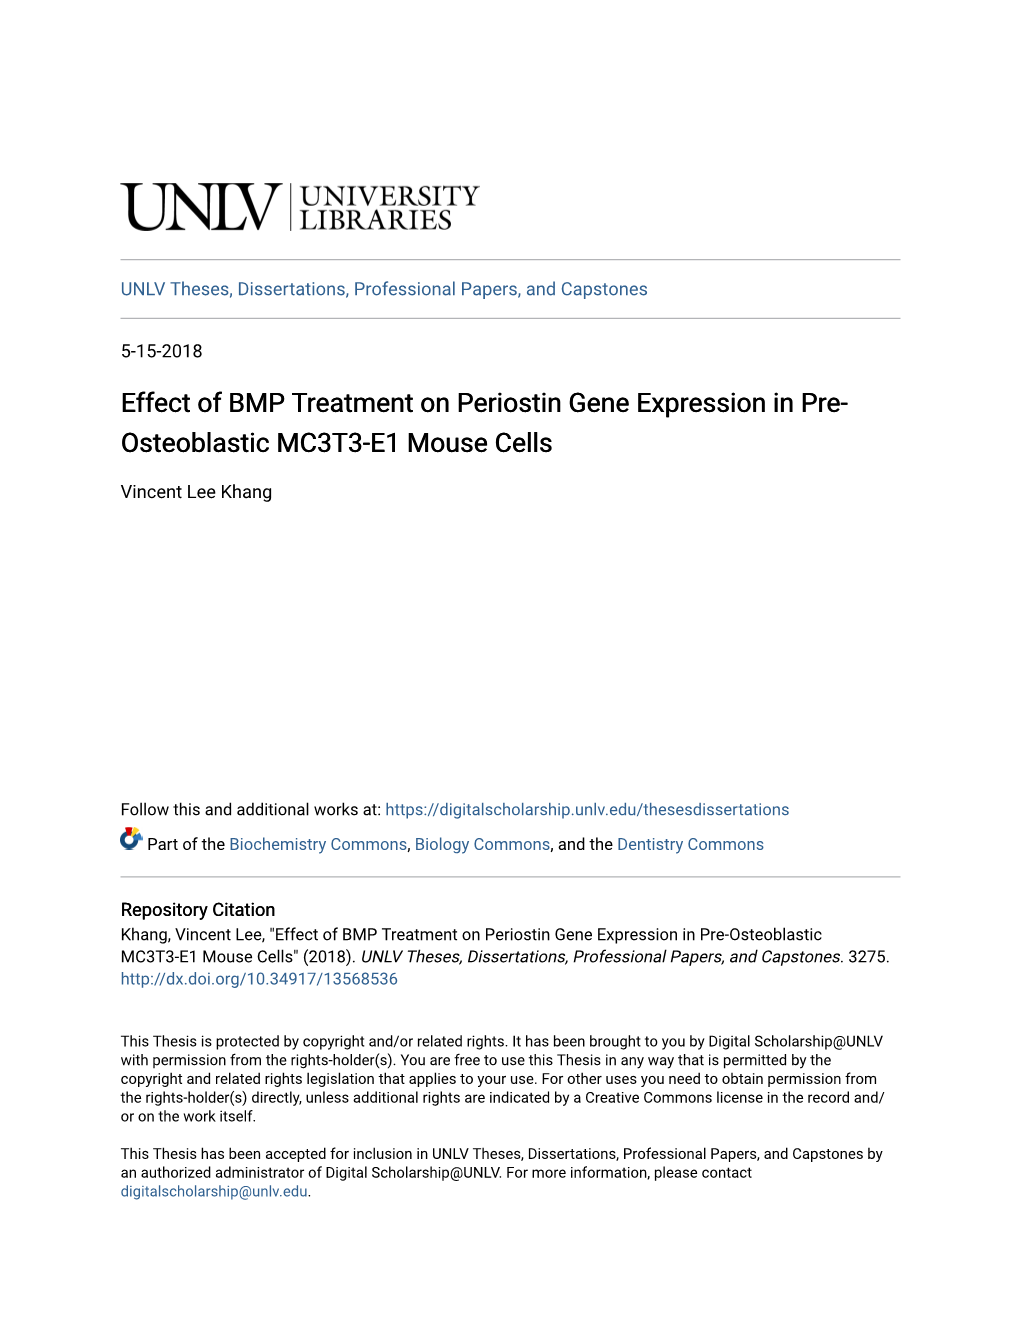 Effect of BMP Treatment on Periostin Gene Expression in Pre- Osteoblastic MC3T3-E1 Mouse Cells